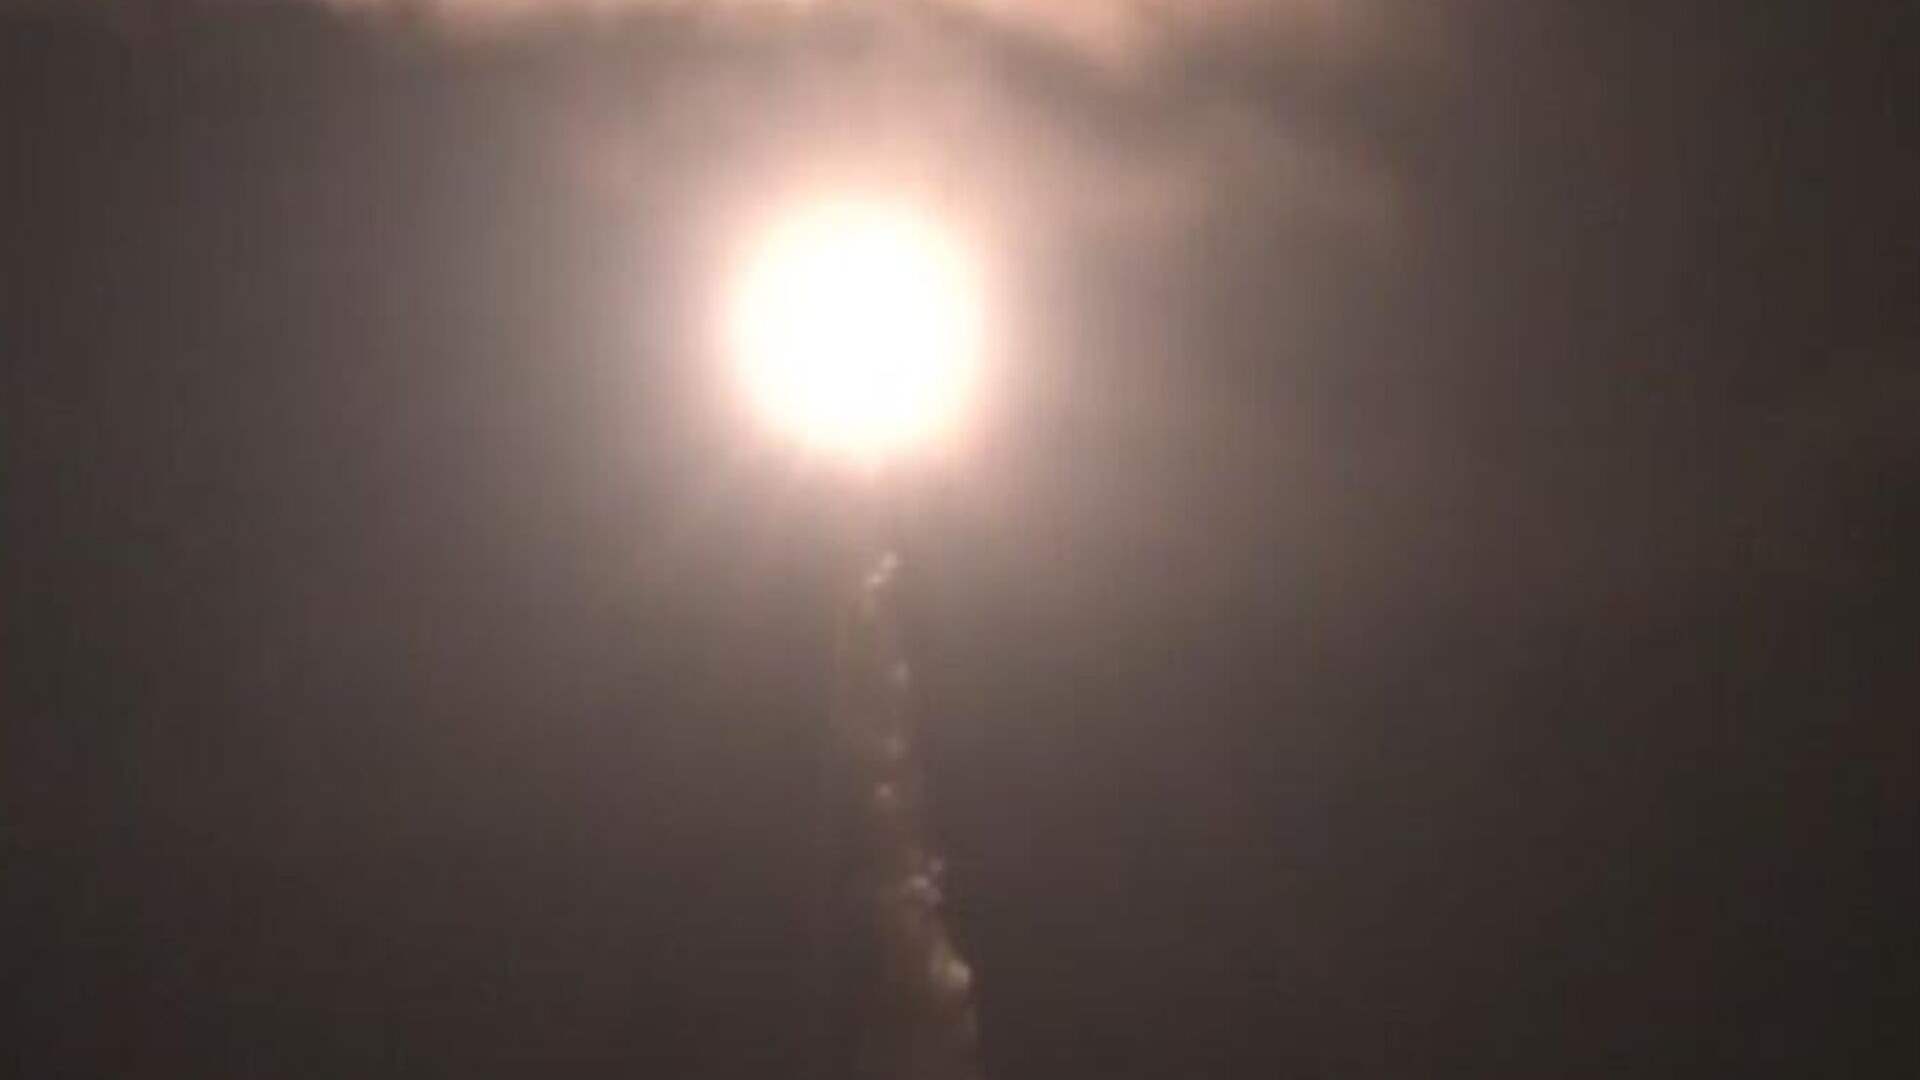 Russia successfully tests intercontinental ballistic missile